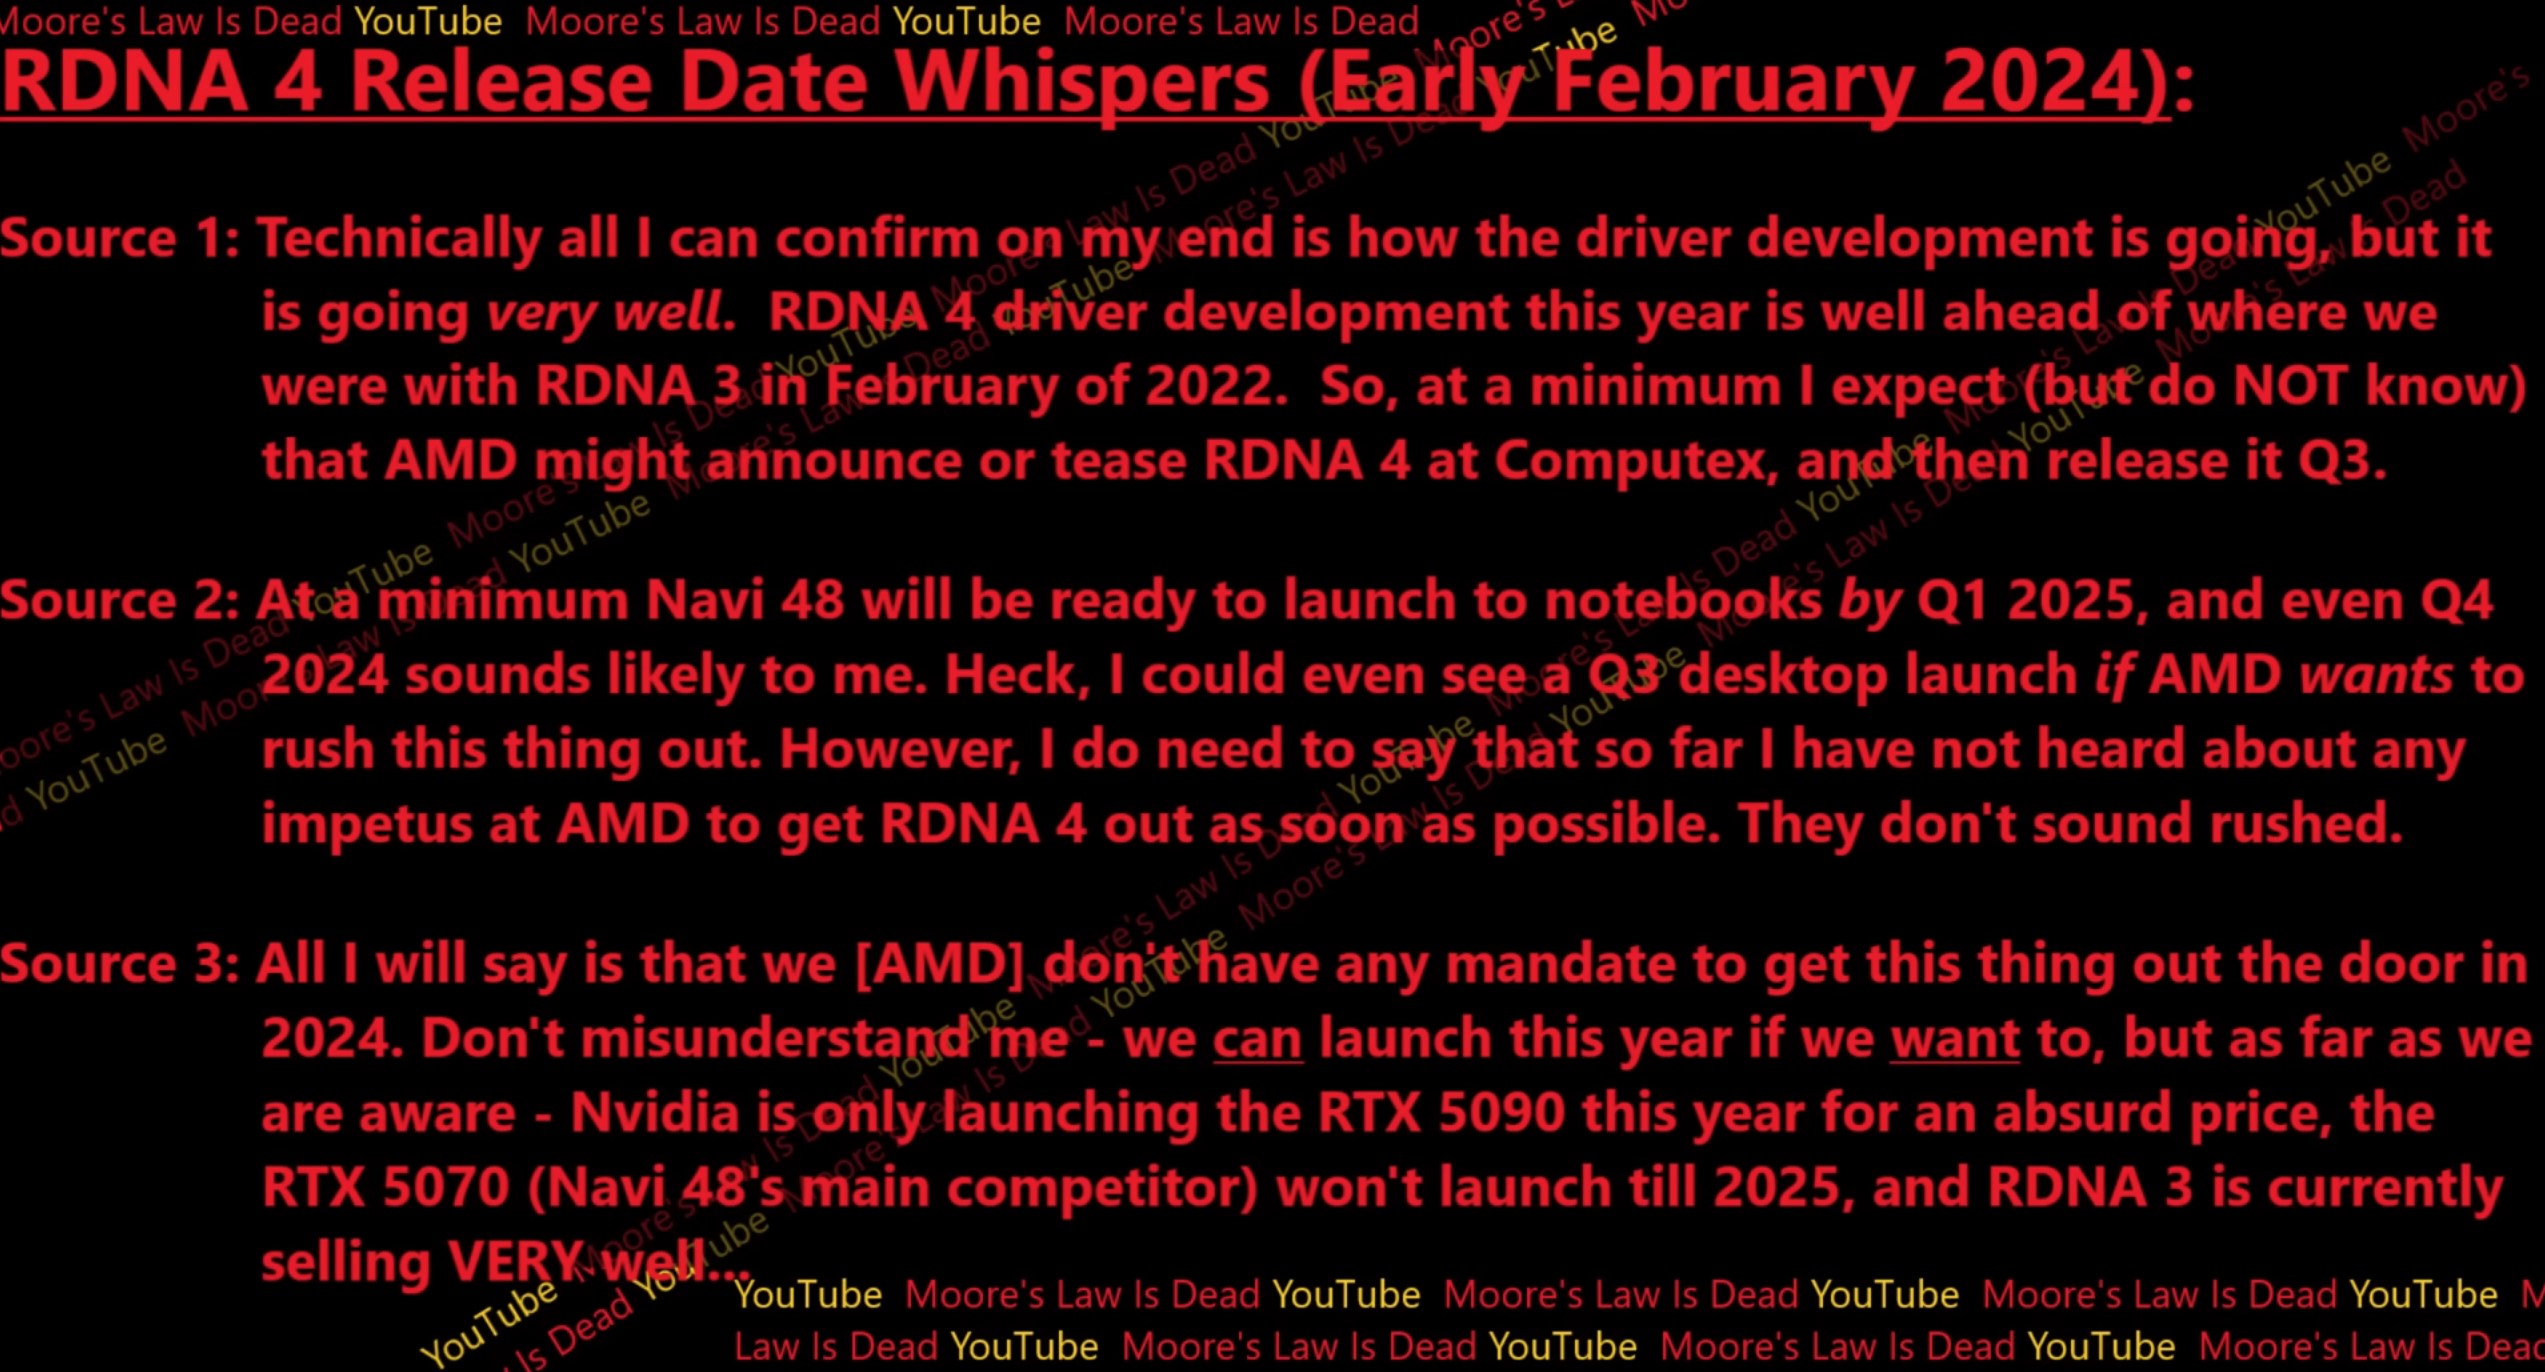 Several quotes from Moore's Law Is Dead pertaining to AMD's RDNA 4 release dates.